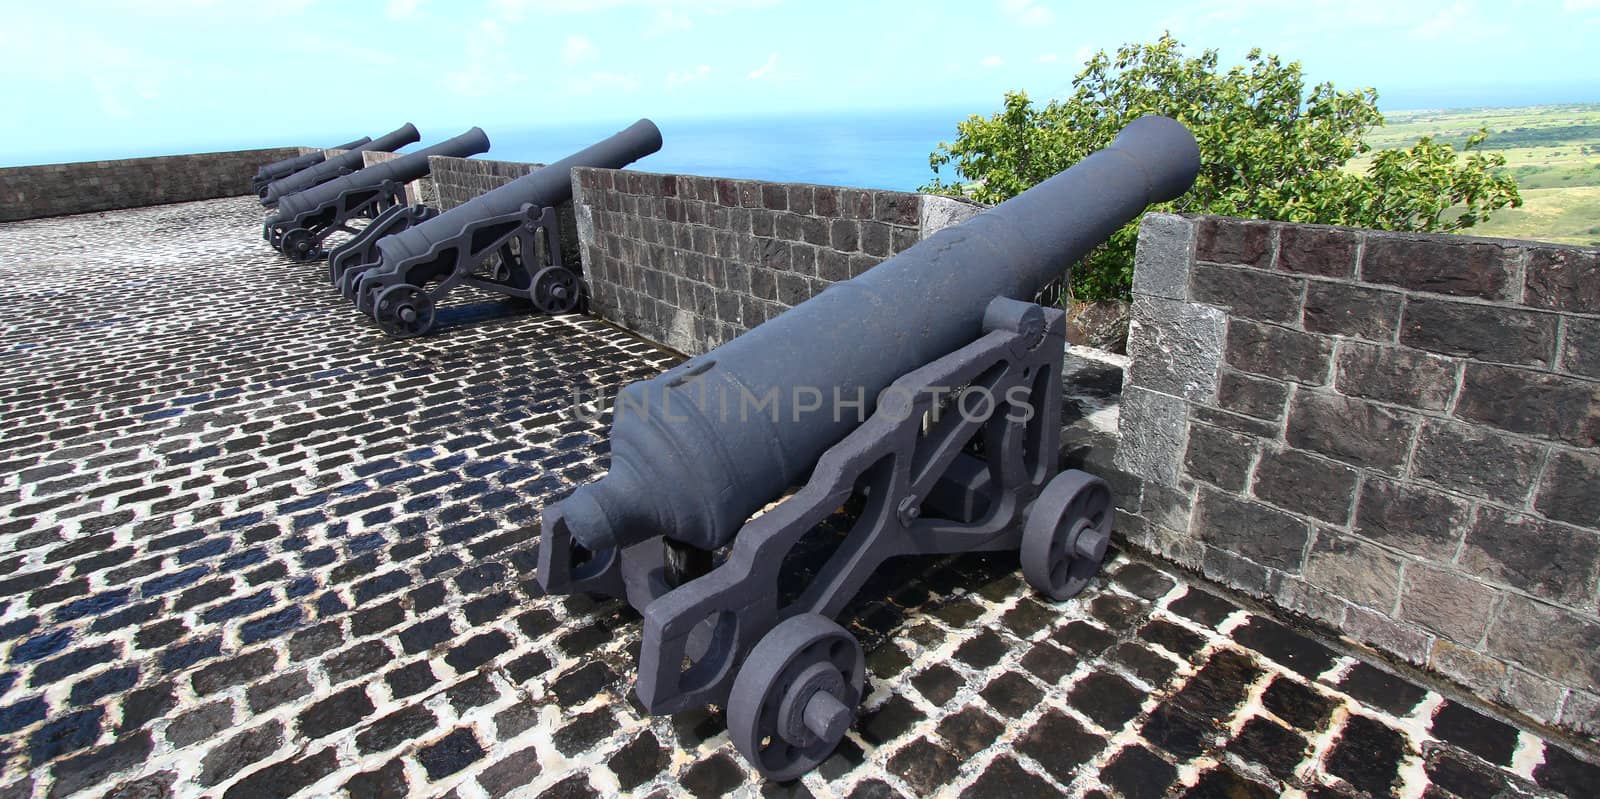 Brimstone Hill Fortress - Saint Kitts by Wirepec